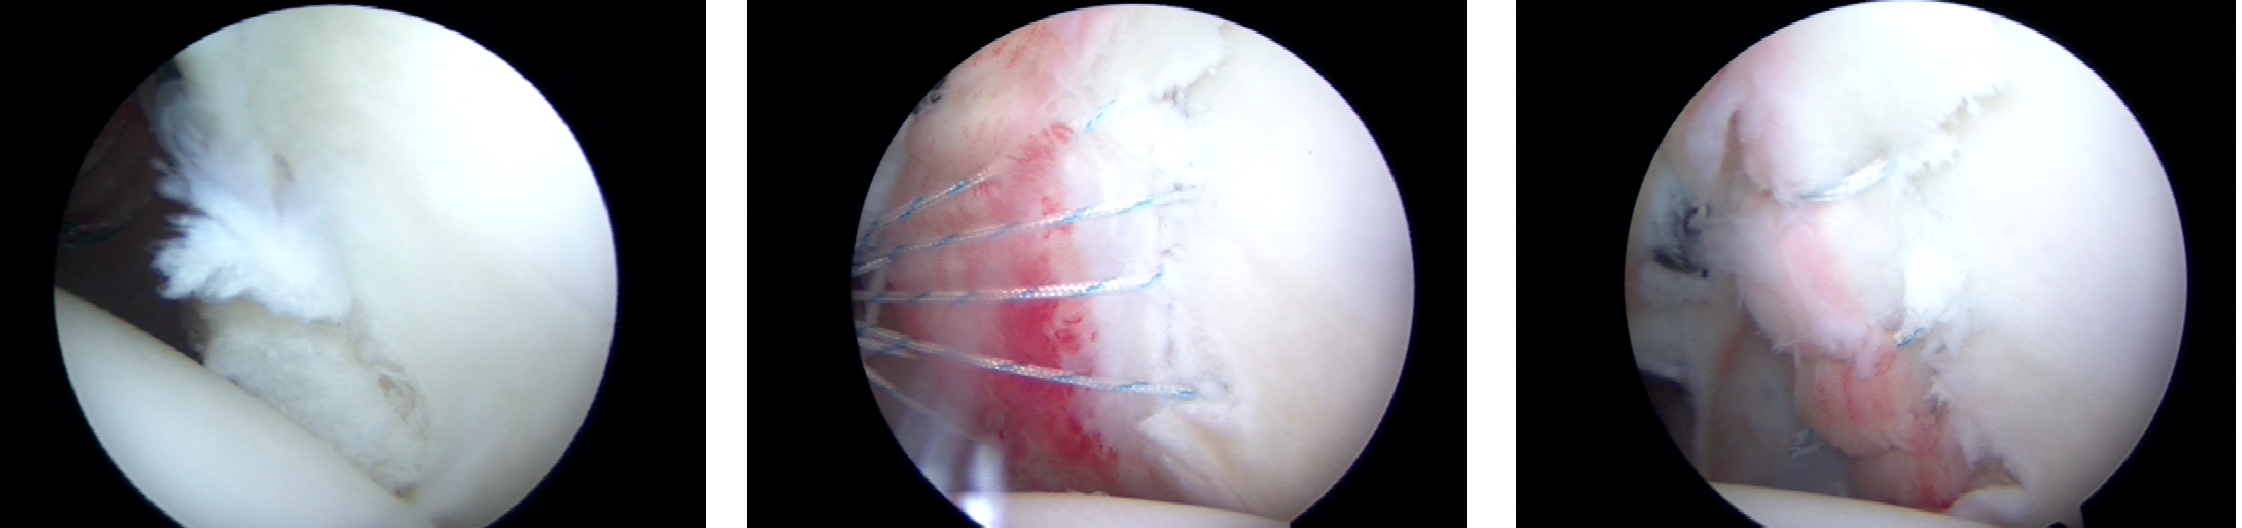 Arthroscopic View of Right Shoulder posterior Bankart tear associated with a posterior shoulder dislocation.  Left image: Posterior Labrum tear, Middle image: All-Suture anchors placed into the glenoid, Right Picture: Repaired Posterior Labrum tear.